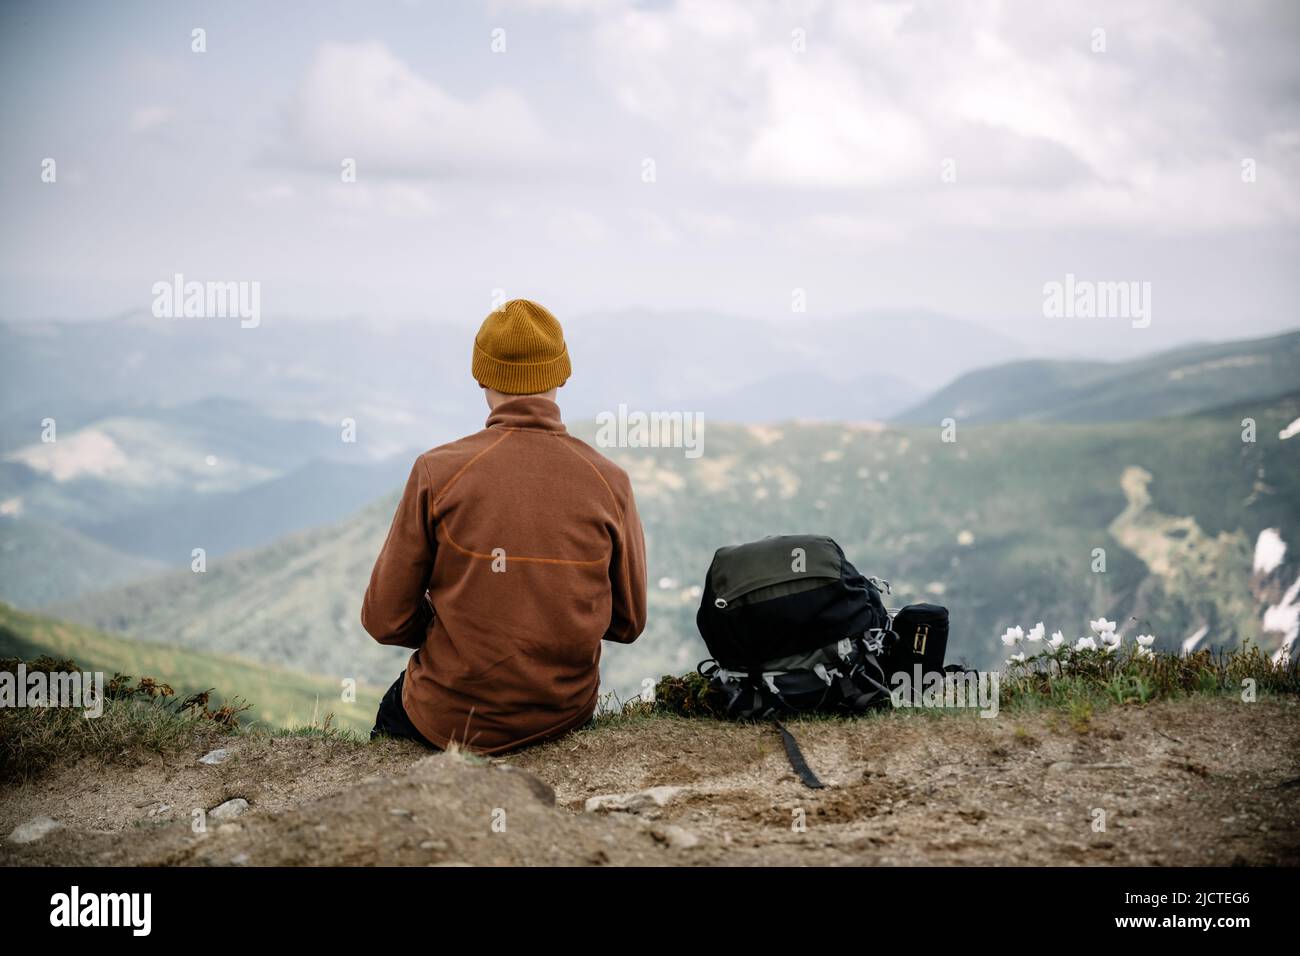 A tourist sits on the edge of a mountain peak. Foggy mountains on the background. Landscape photography Stock Photo